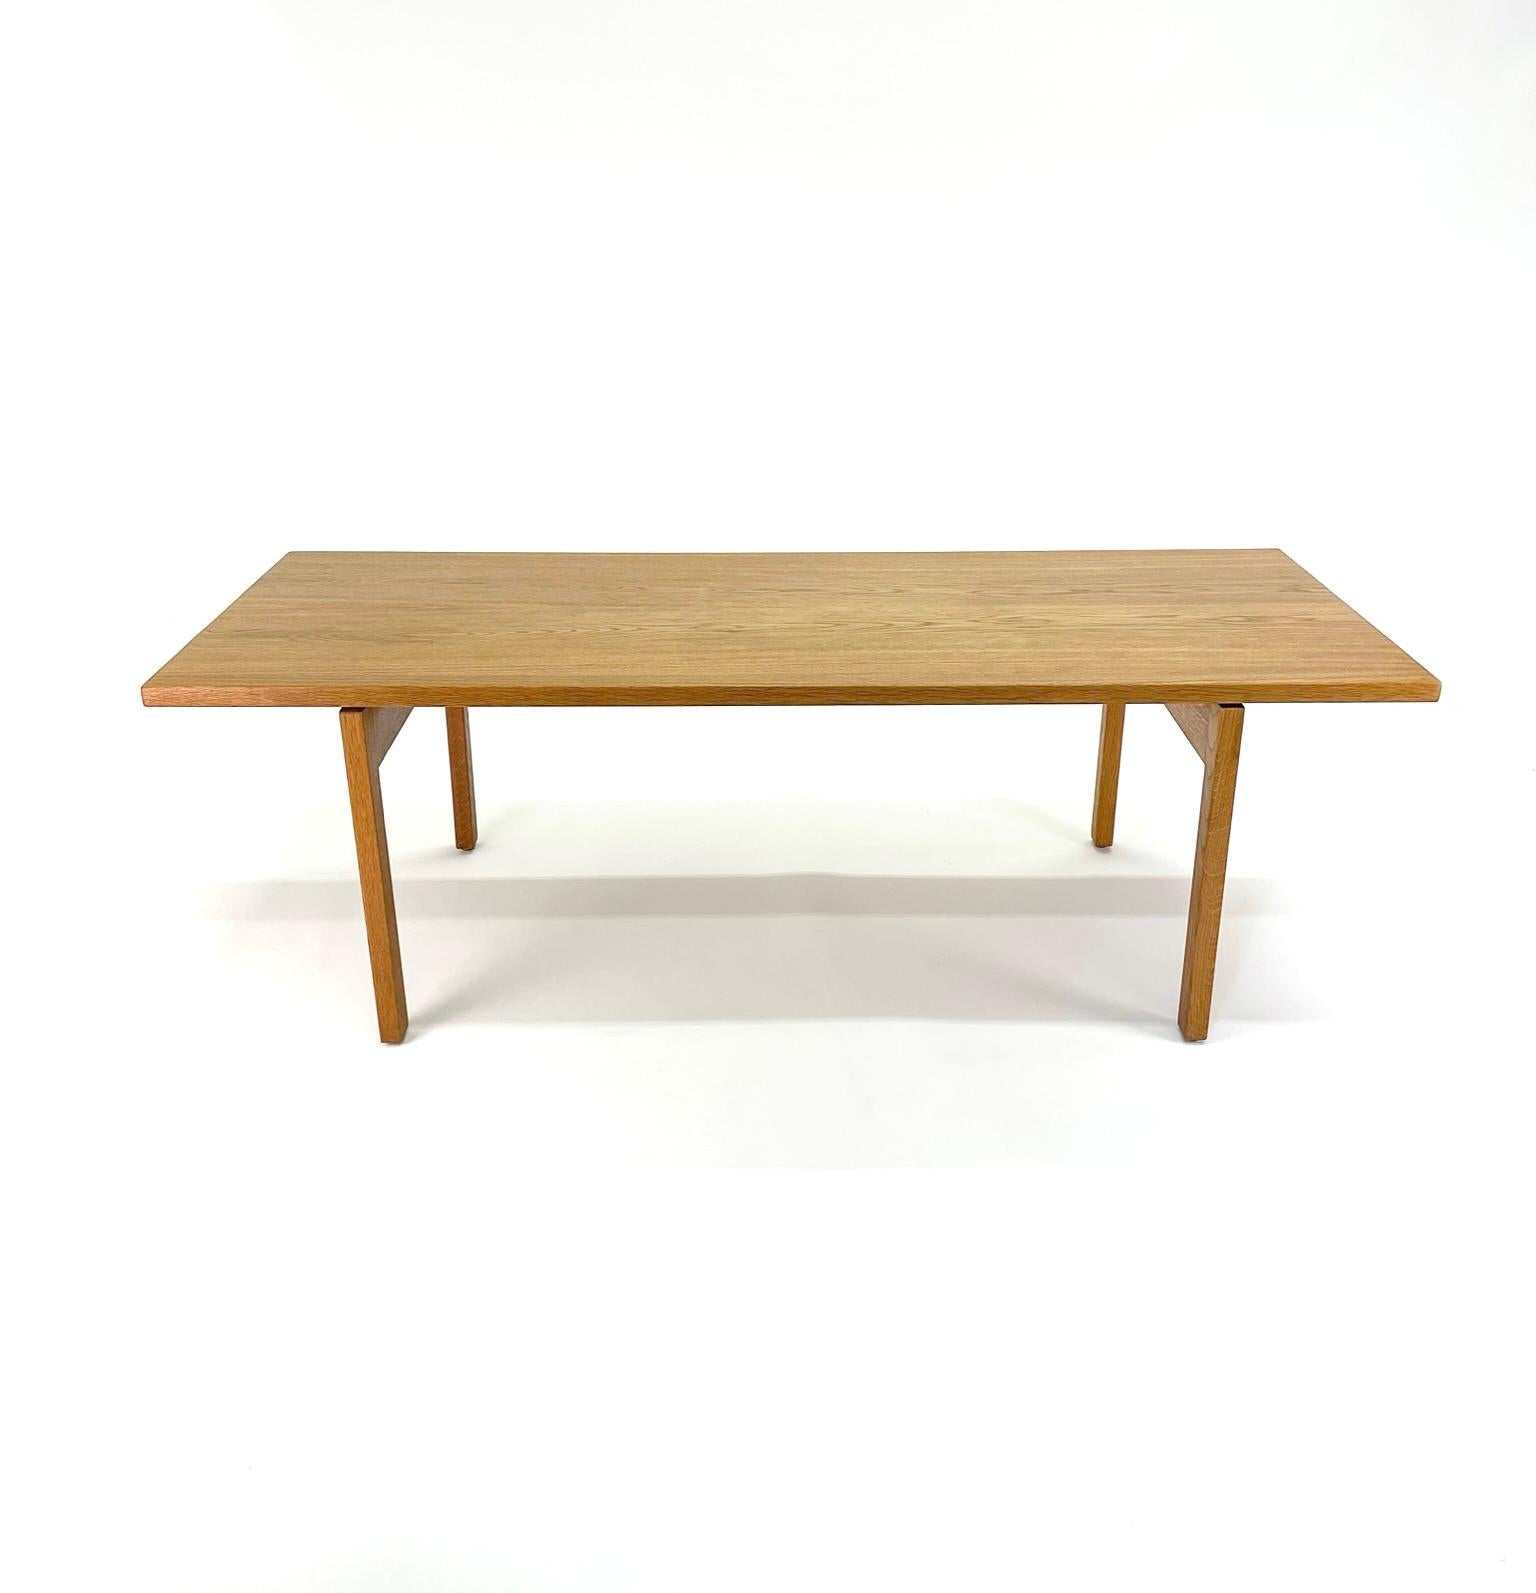 Modernist oak coffee table designed by Hans Wegner for Andreas Tuck, model AT-15, Denmark circa 1960s

A robust yet elegant blonde coffee table in untreated and solid oak. A thin solid oak top on a solid oak frame that shows off the beautiful wood